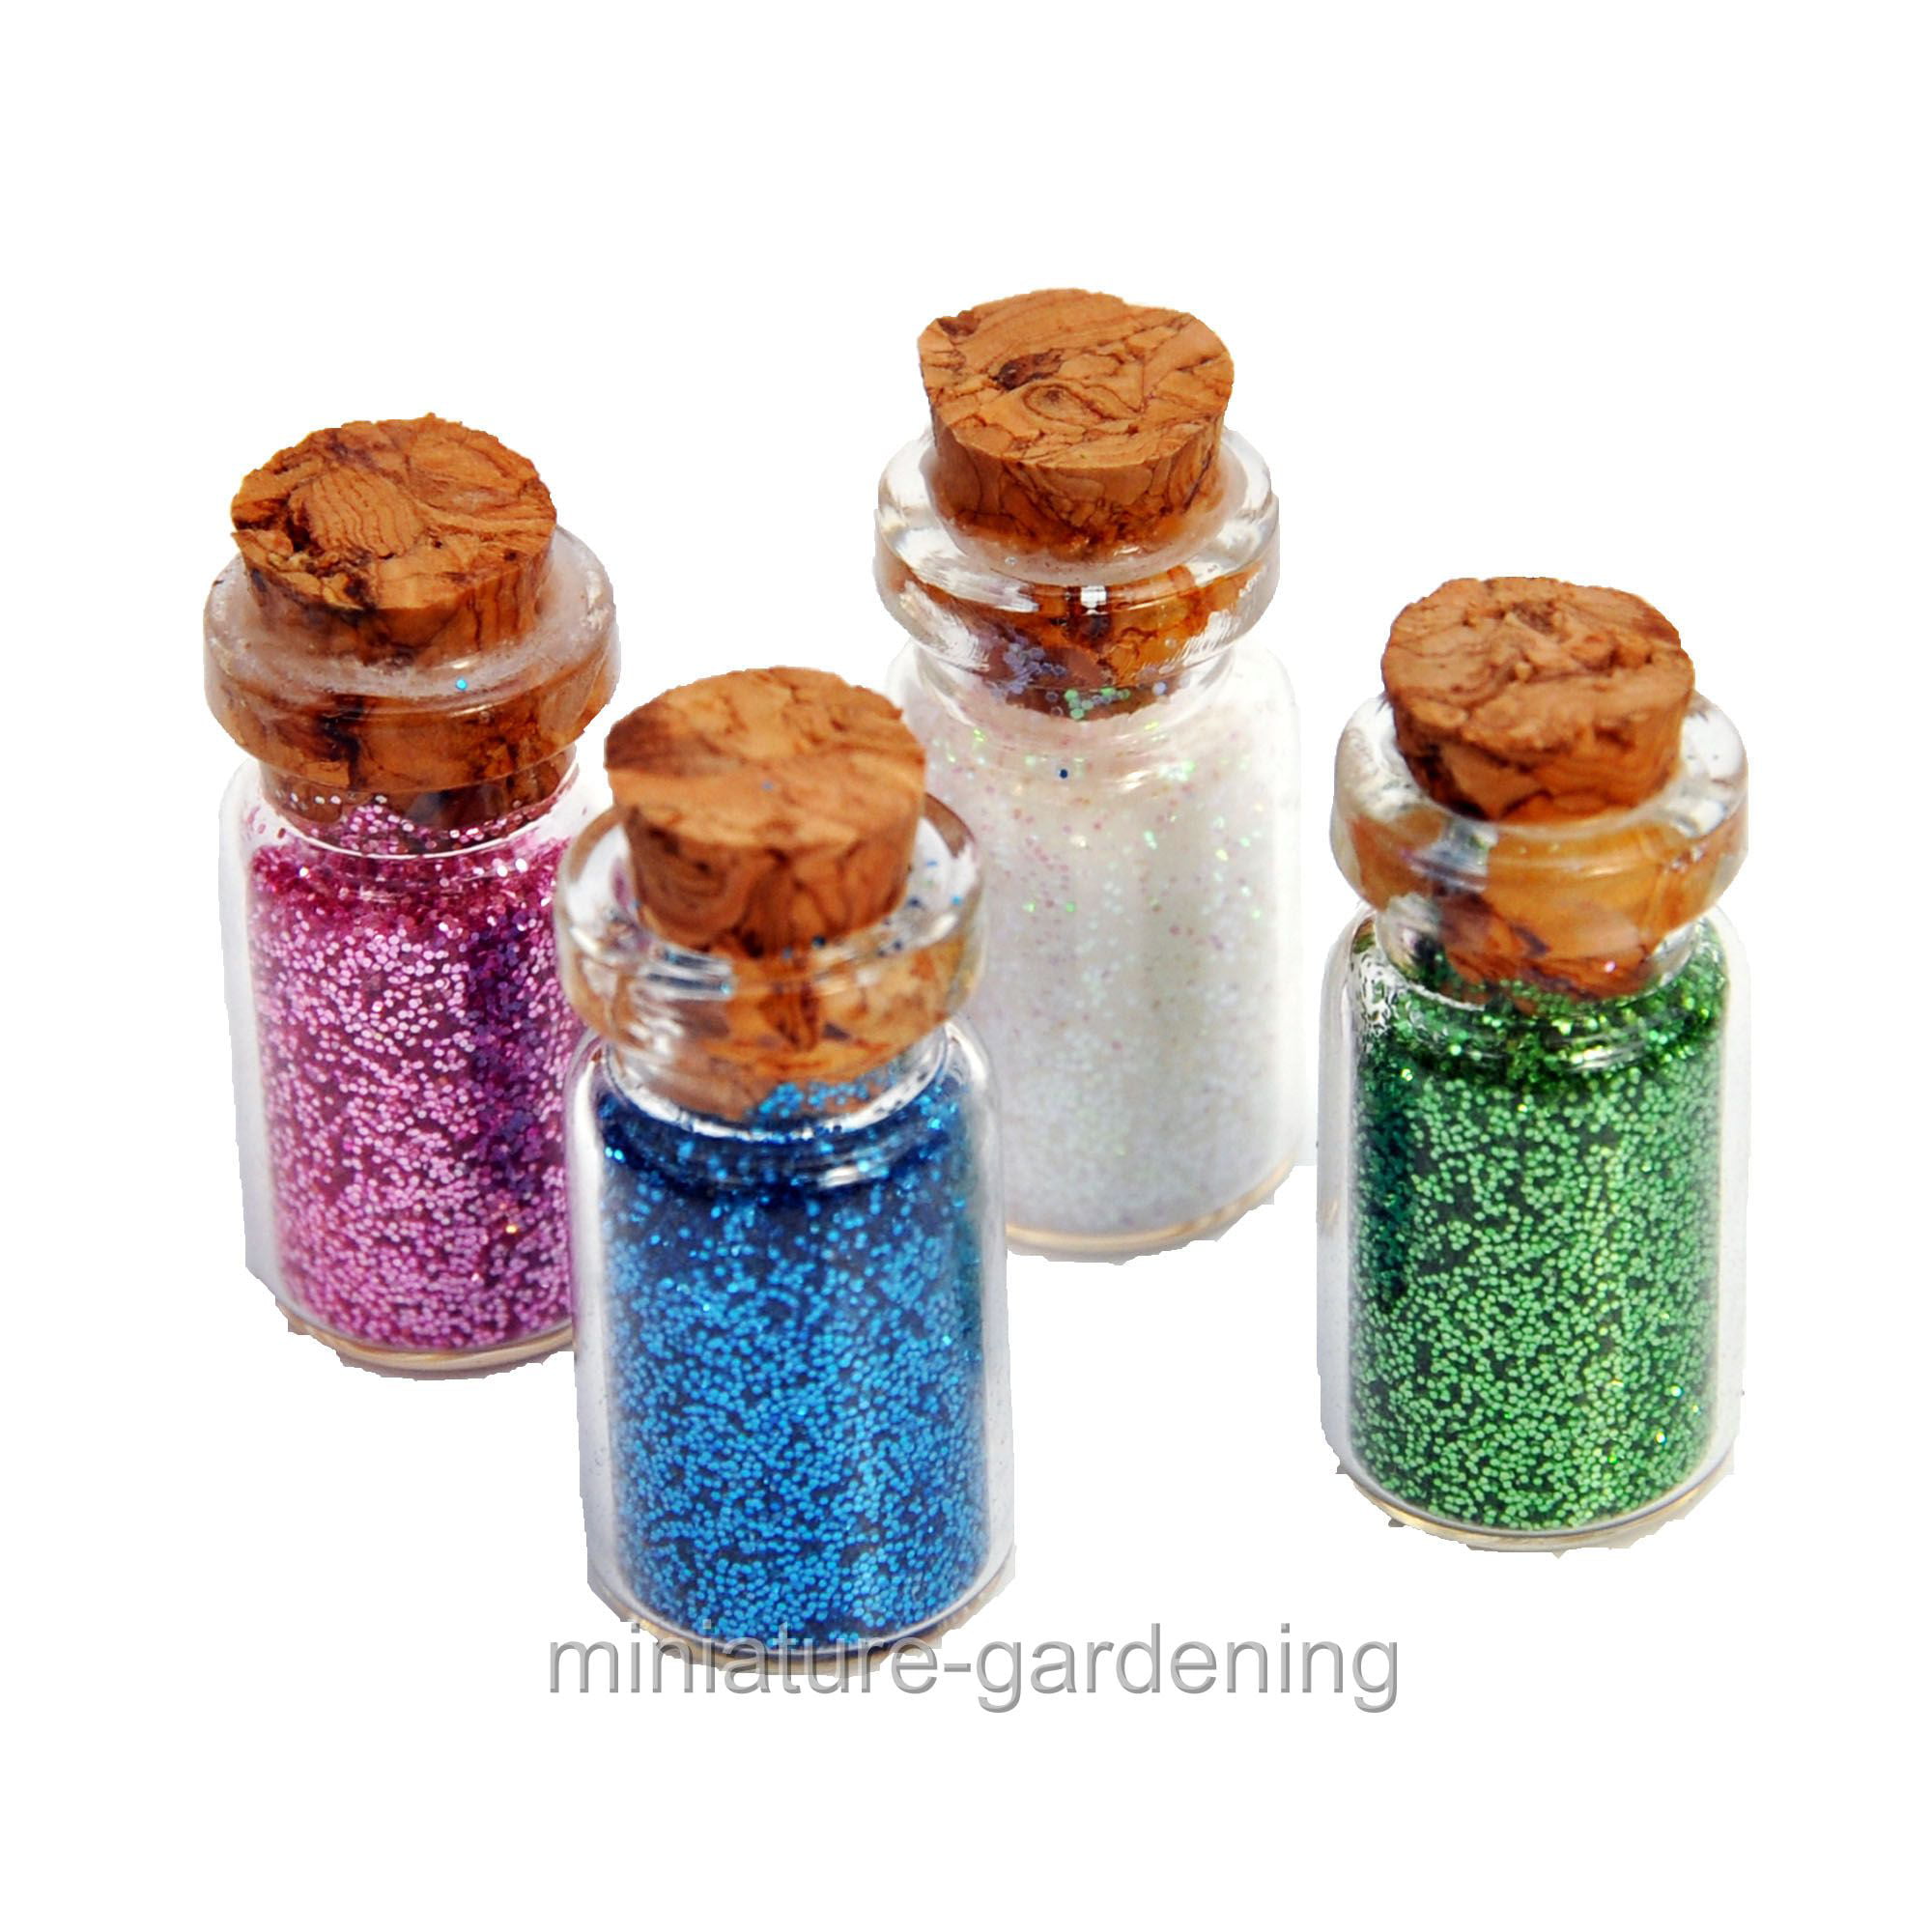  DARICE Glass Fairy Dust Bottles with Glitter, 4 Colors